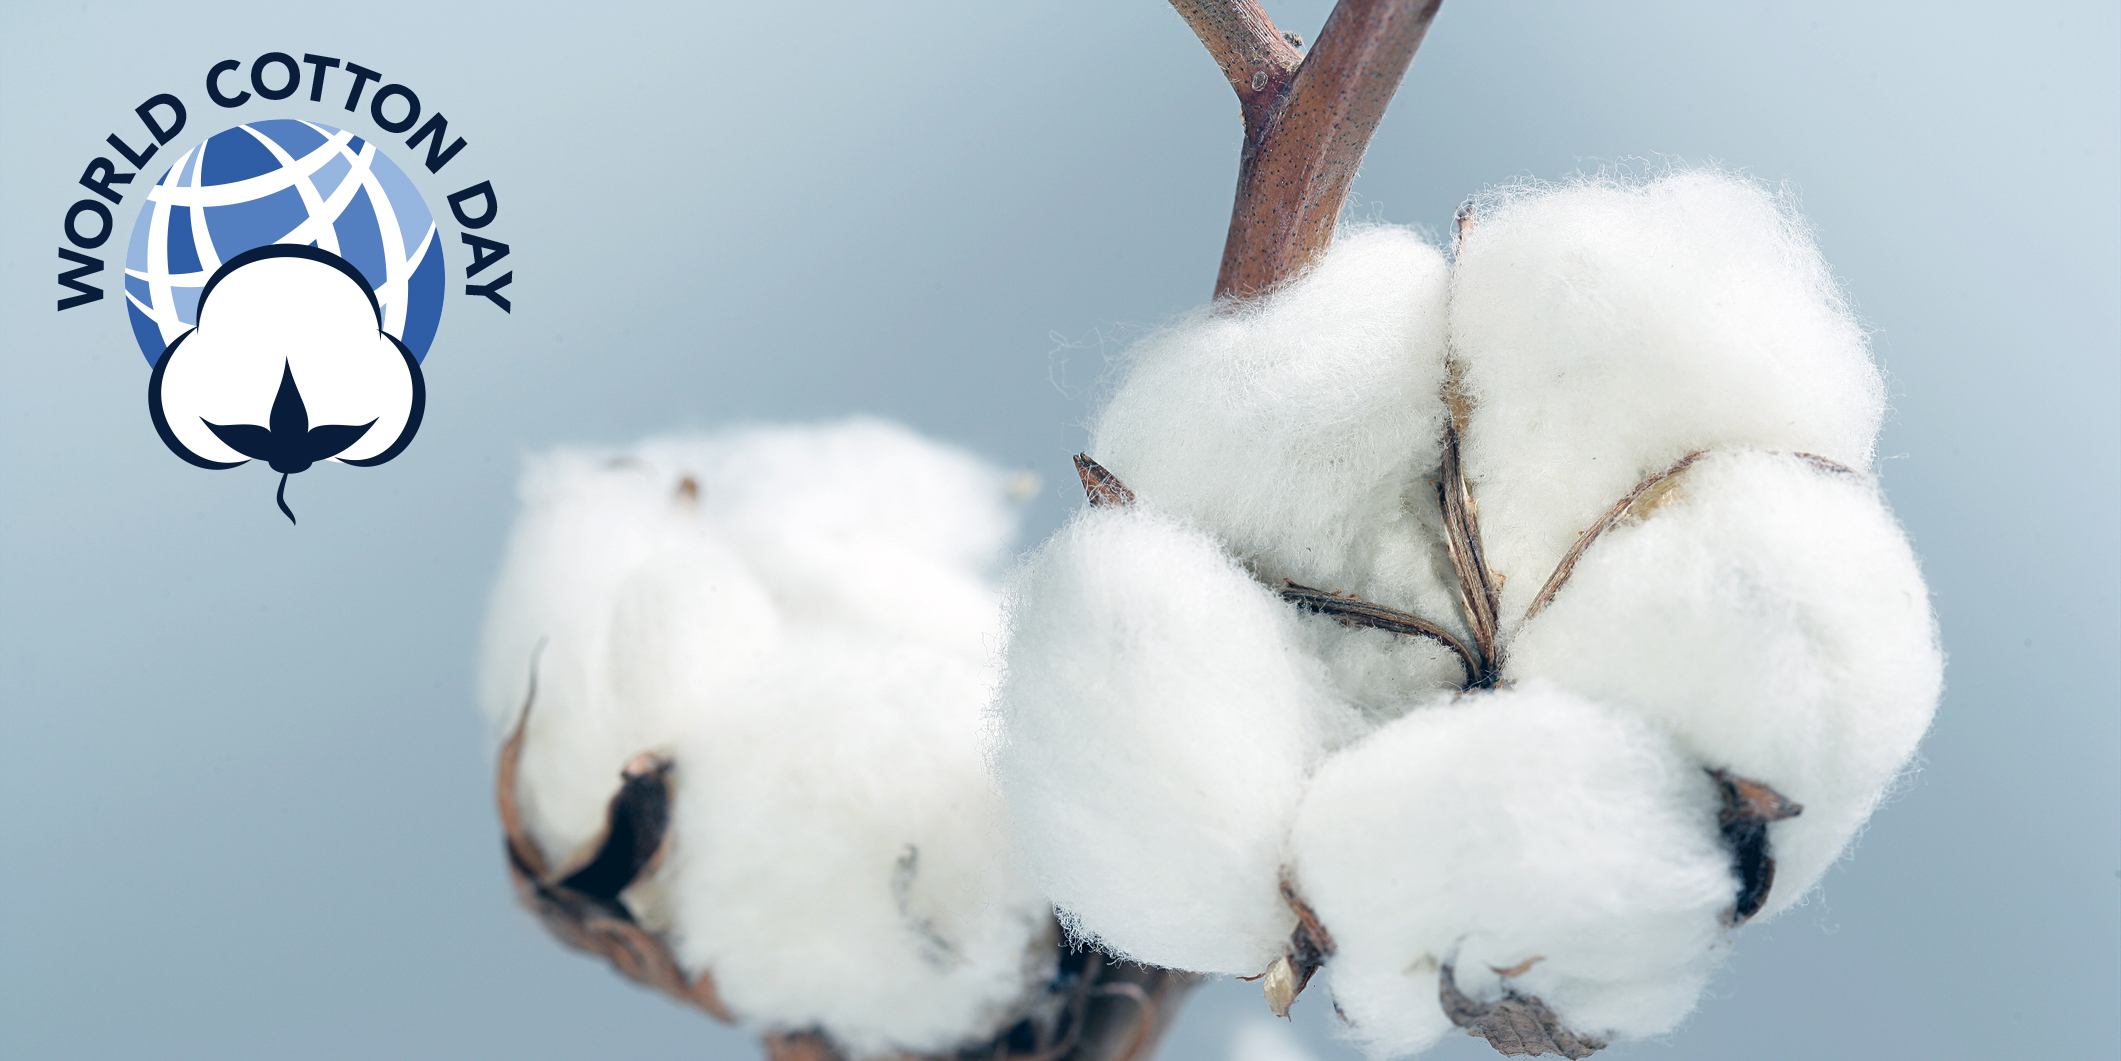 International Day Explains Why Cotton is More than Just a Commodity